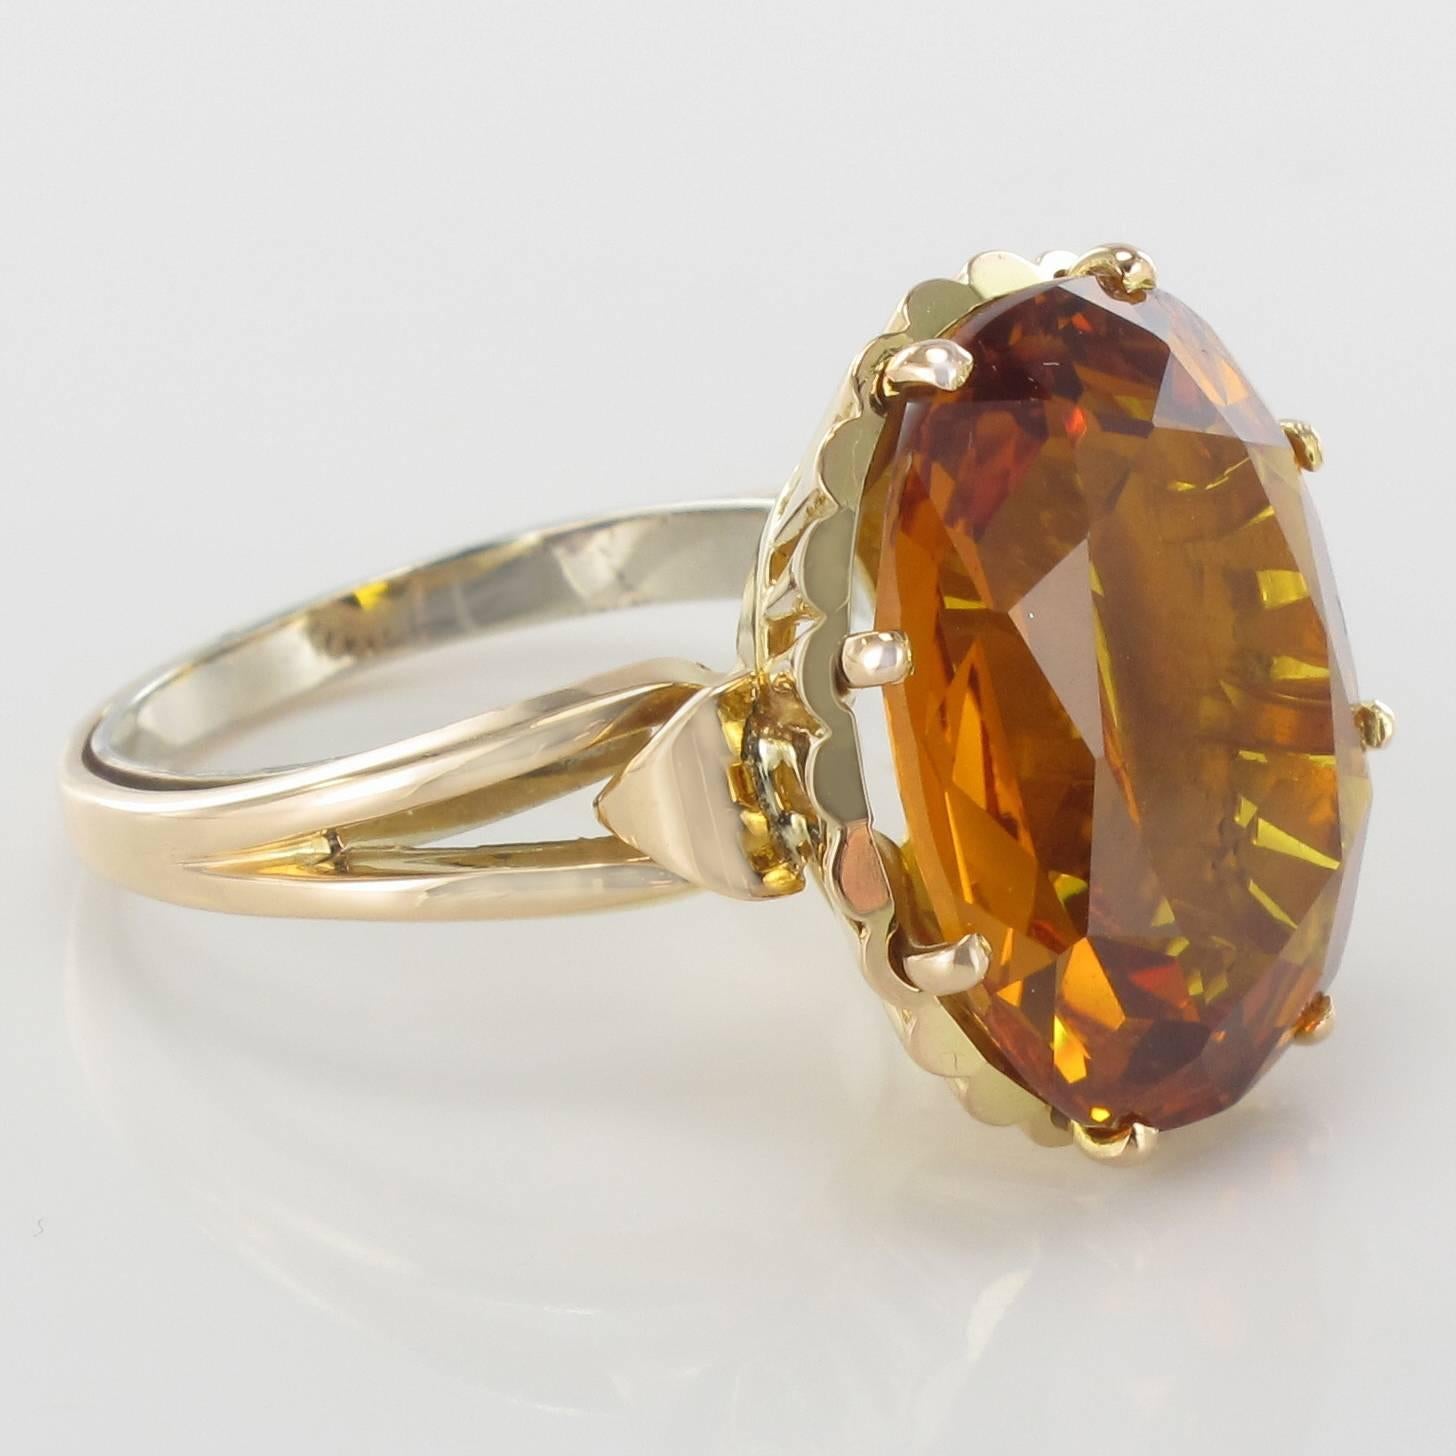 French Retro 1960s 8.90 carat Citrine 18K Yellow Gold Cocktail Ring 1